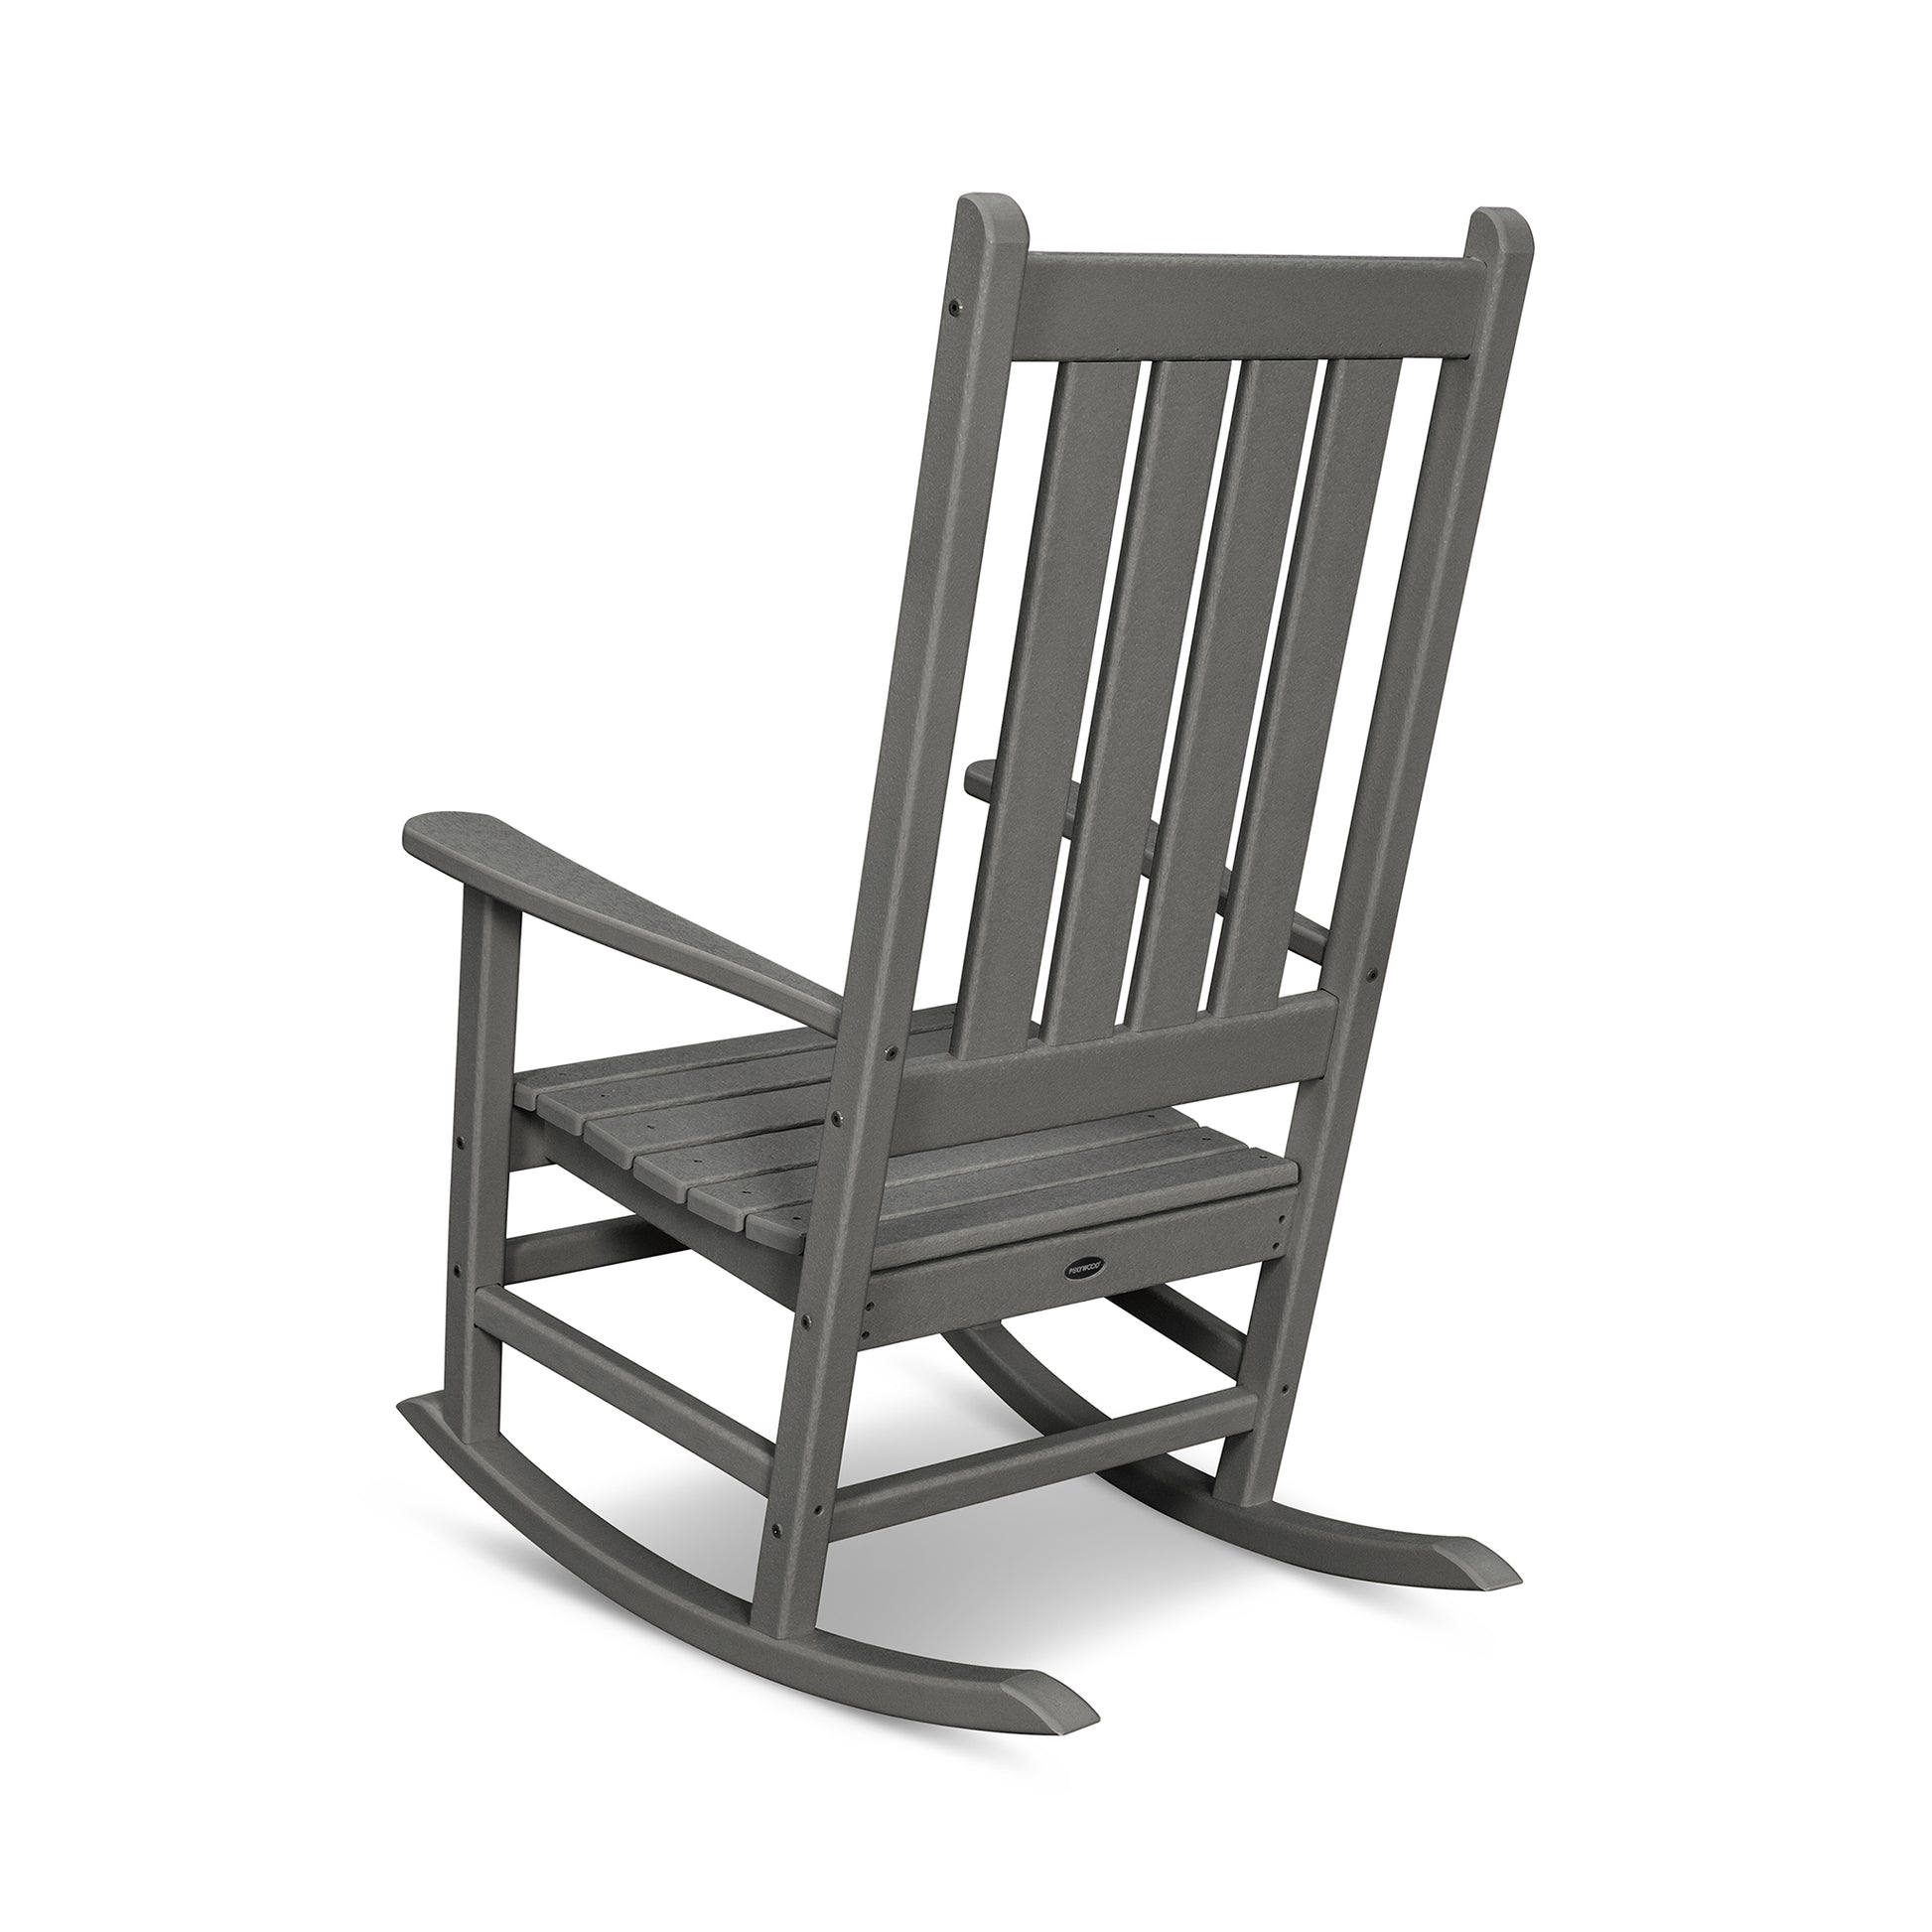 A weather-resistant POLYWOOD Vineyard Porch Rocking Chair with a vertical slat back and a flat seat, set against a plain white background.